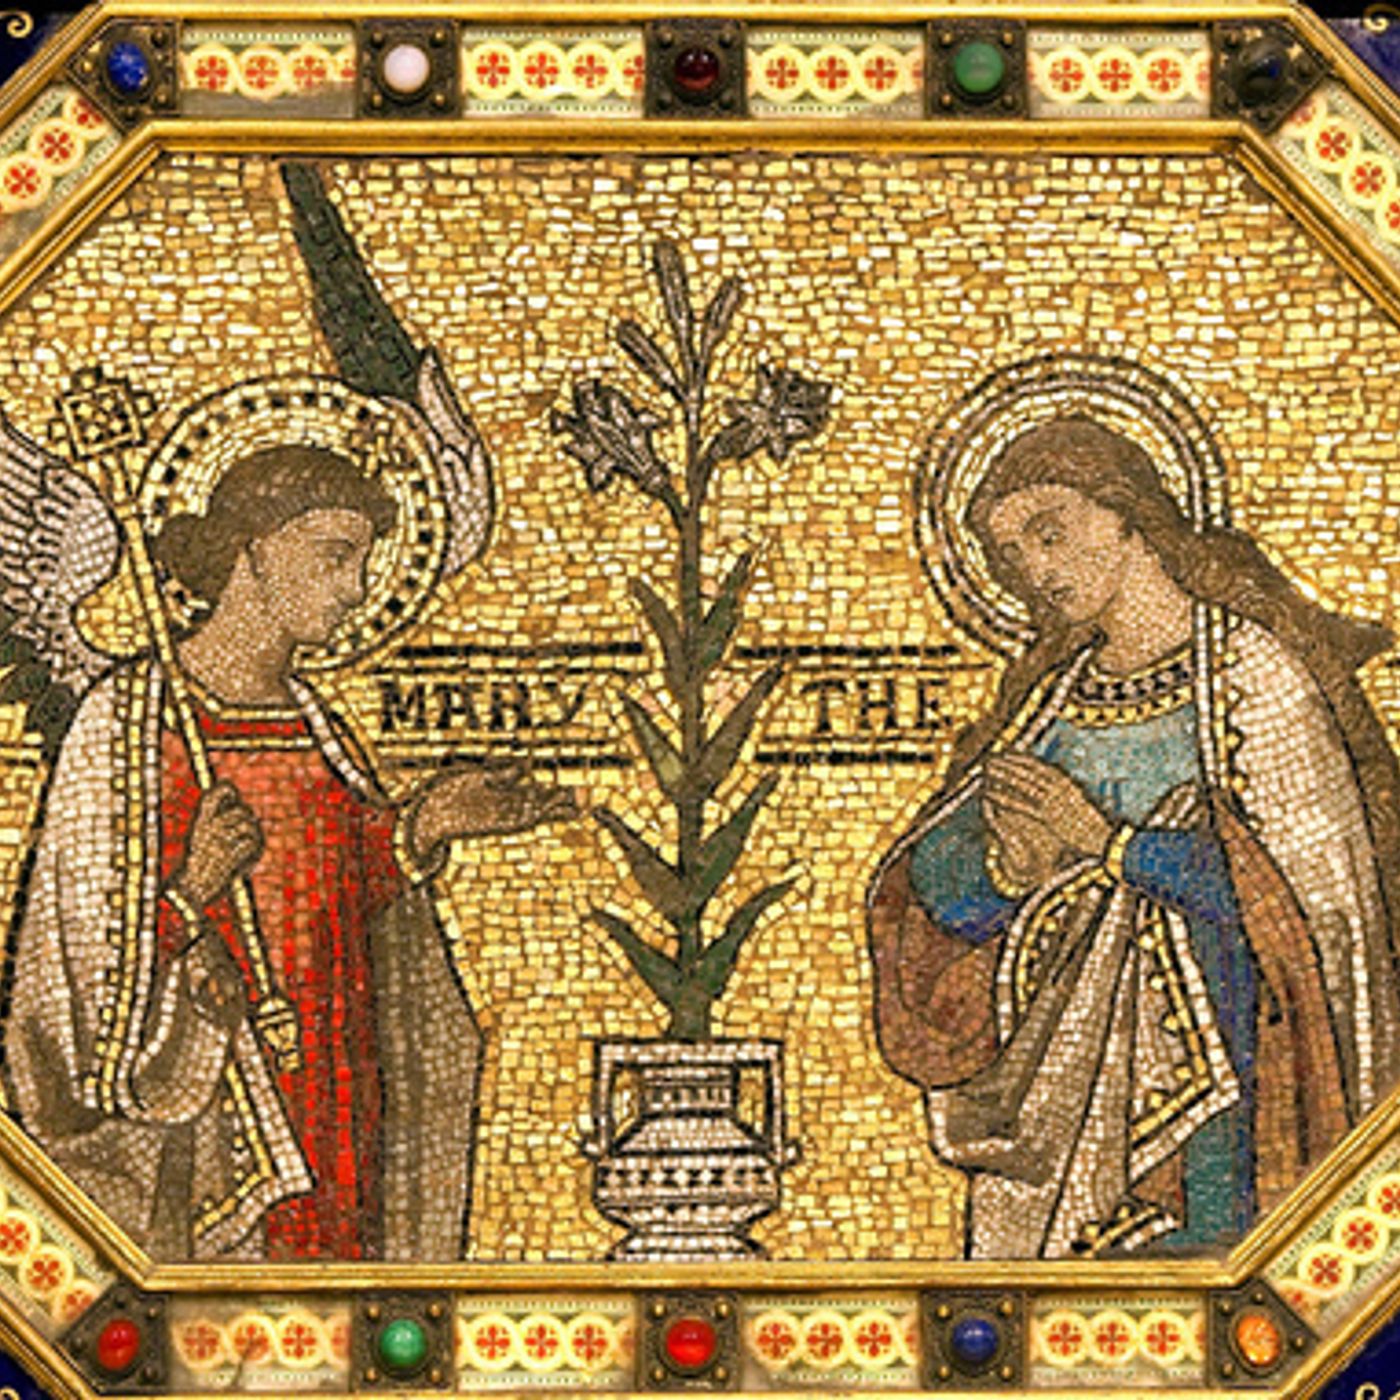 Abbeycast - A podcast for the Feast of the Annunciation